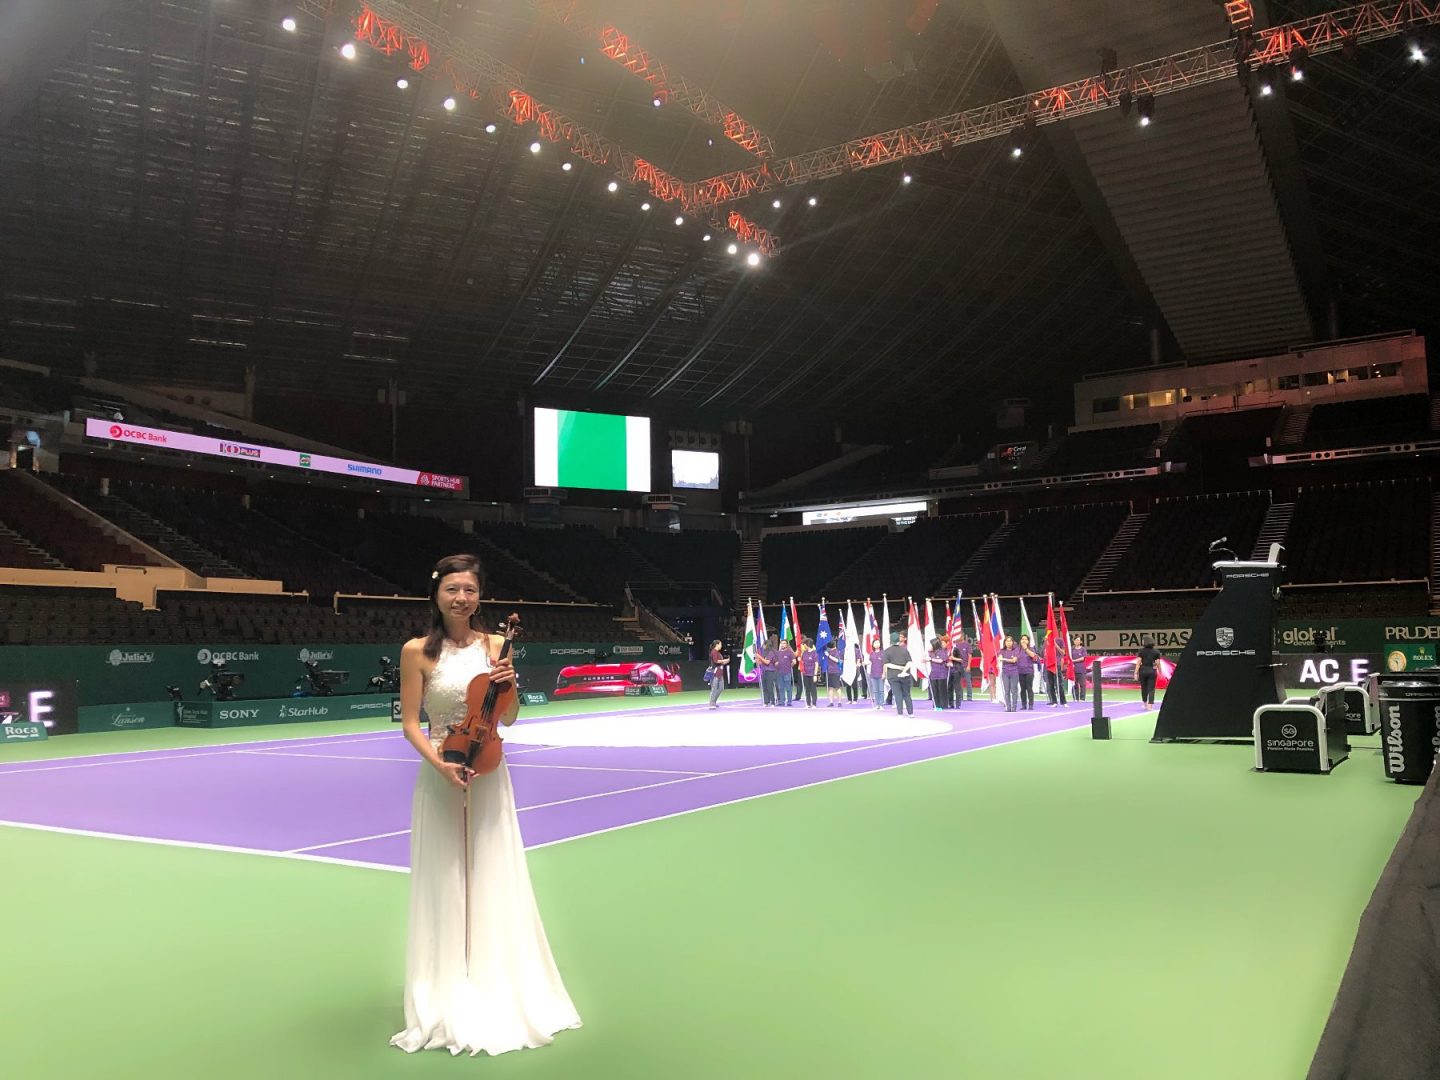 Eileen performing at the Singapore Indoor Stadium for the Opening Ceremony of the WTA 2018